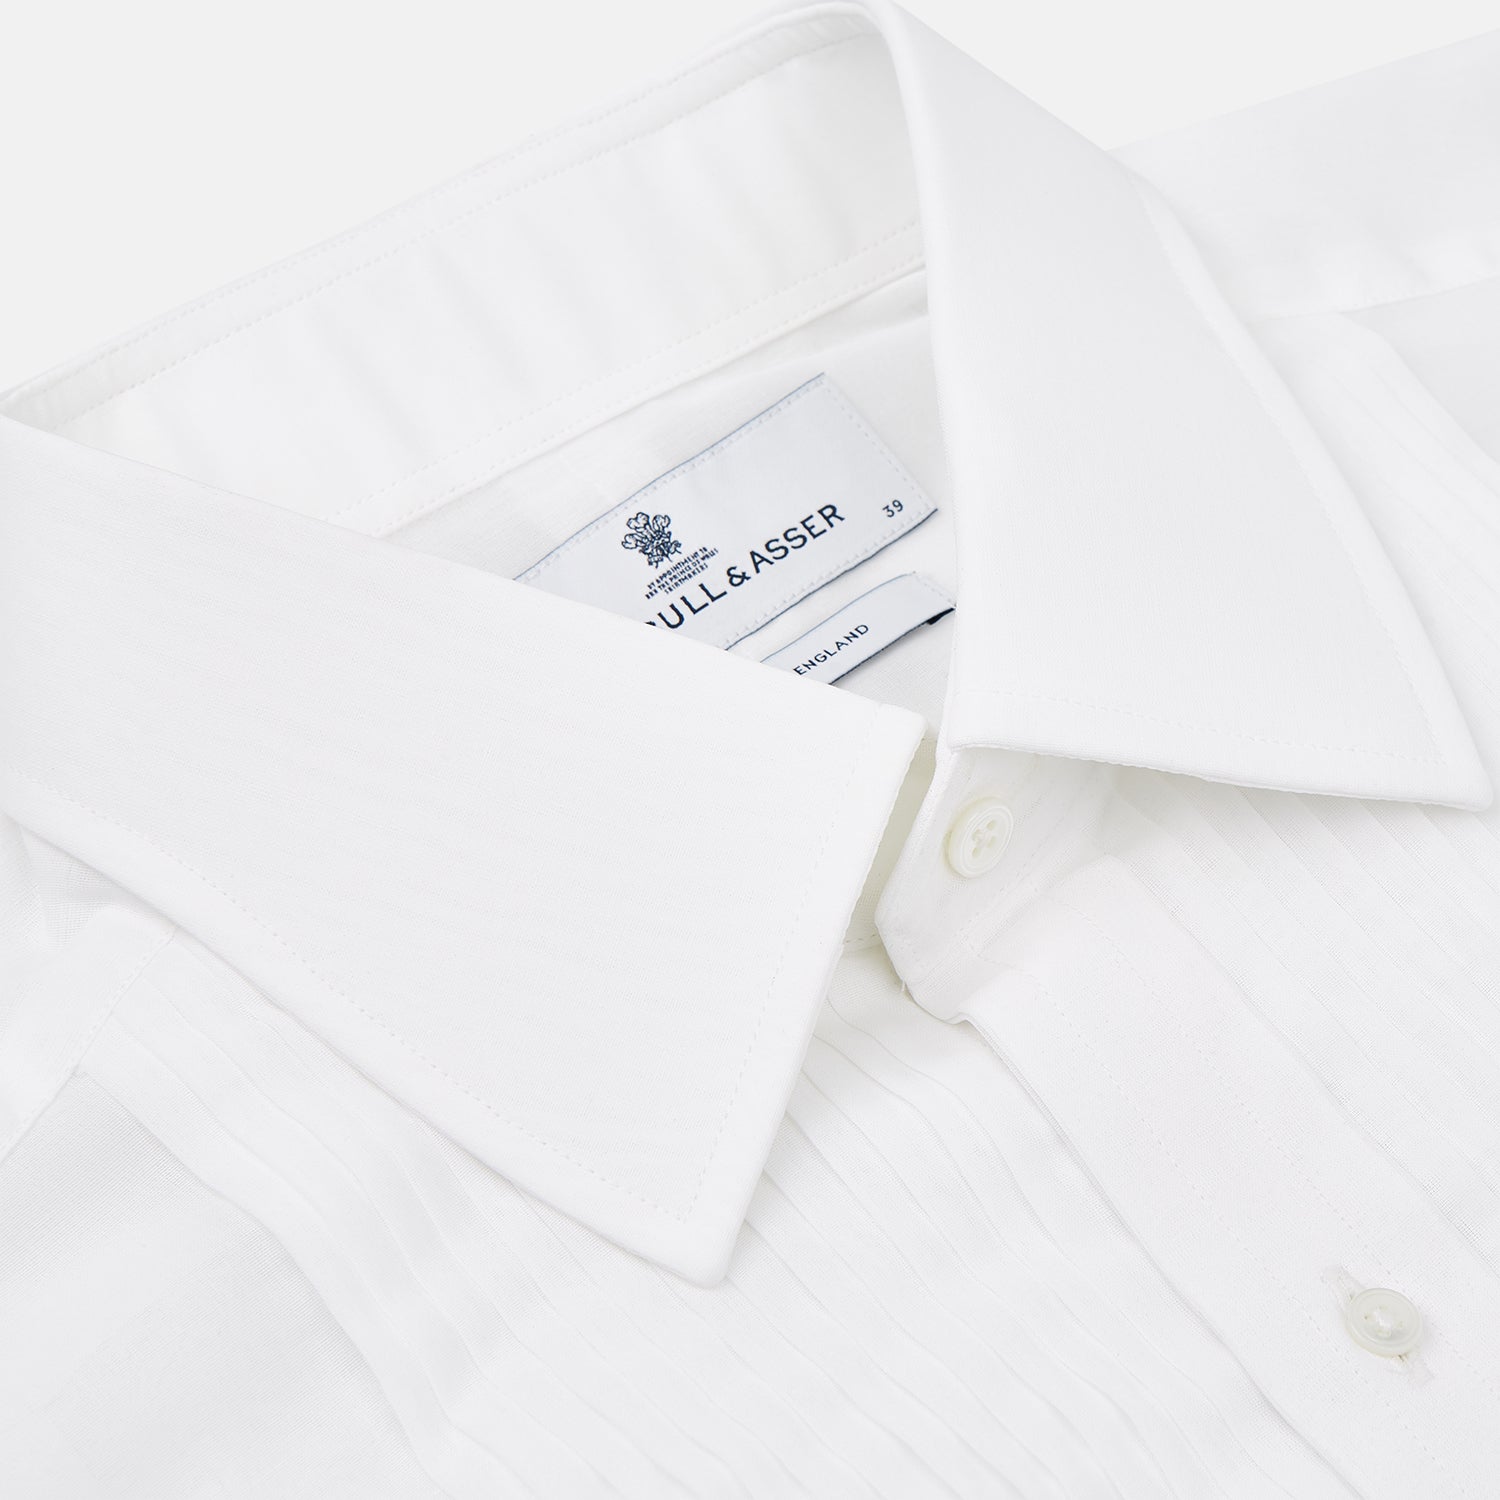 Die Another Day Inspired Voile Dress Shirt